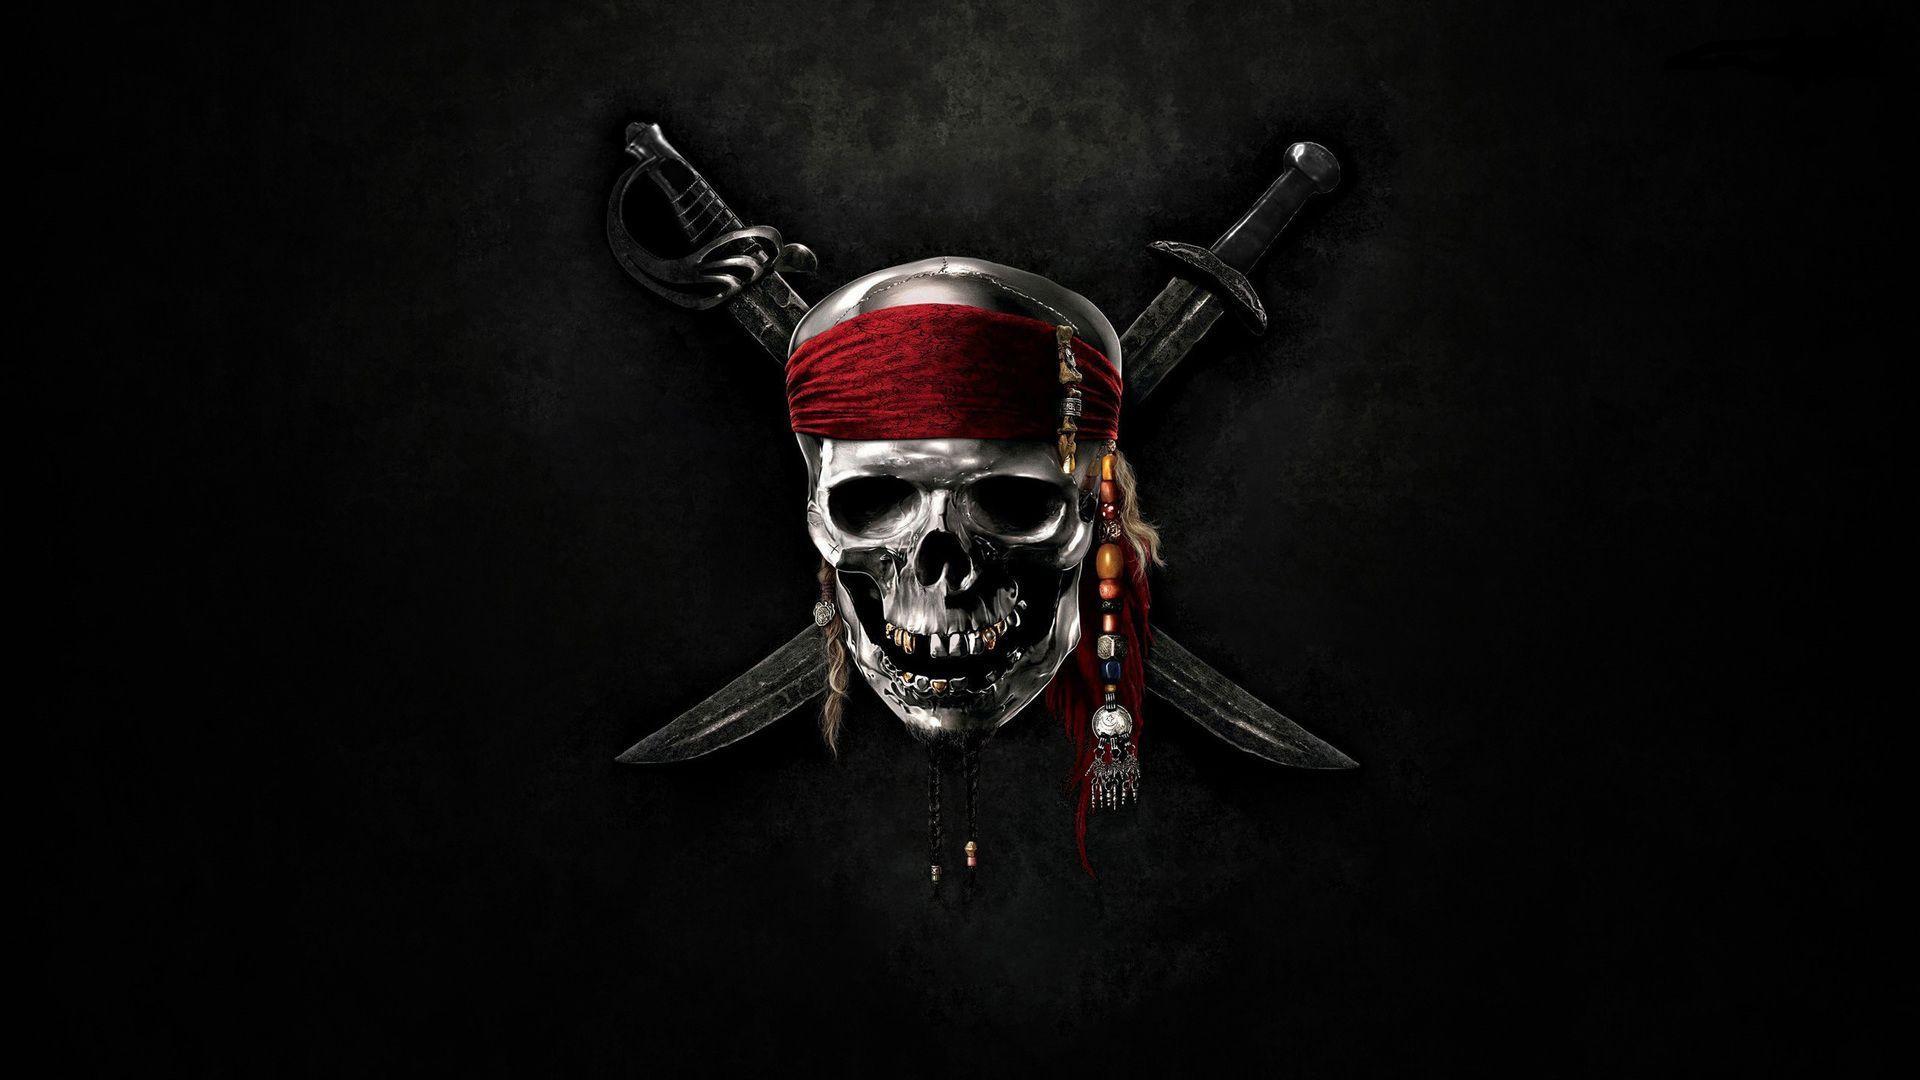 Pirate Flag 1080P 2k 4k Full HD Wallpapers Backgrounds Free Download   Wallpaper Crafter